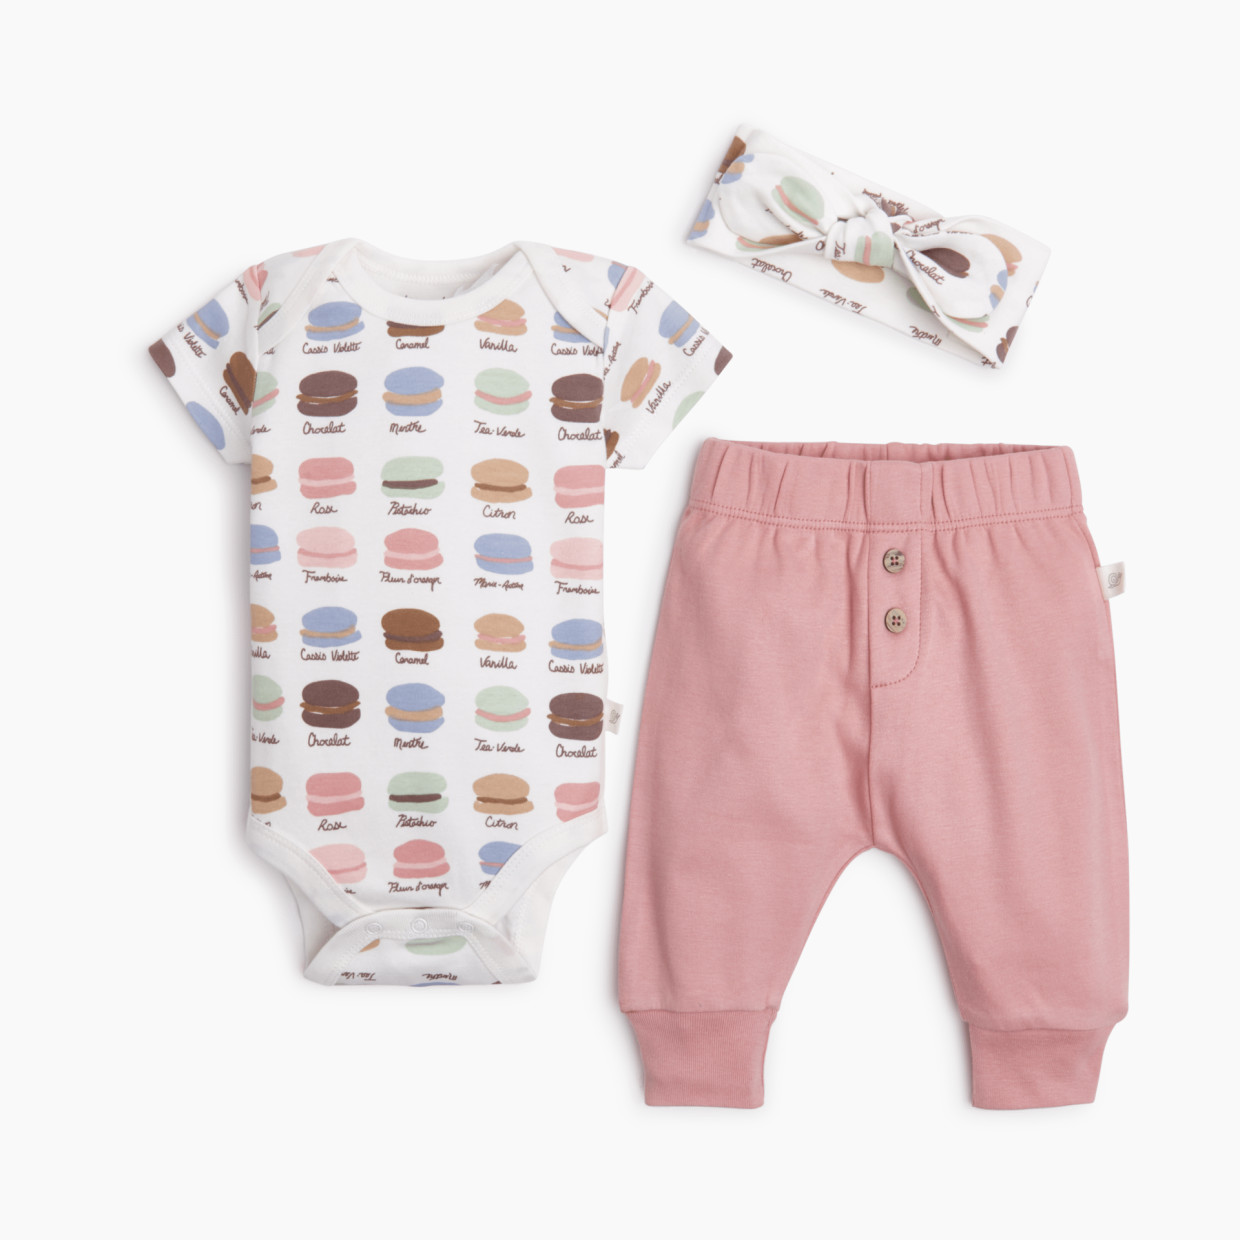 Tiny Kind The Outfit 3 Piece Set - Macaroons, 3-6 M.